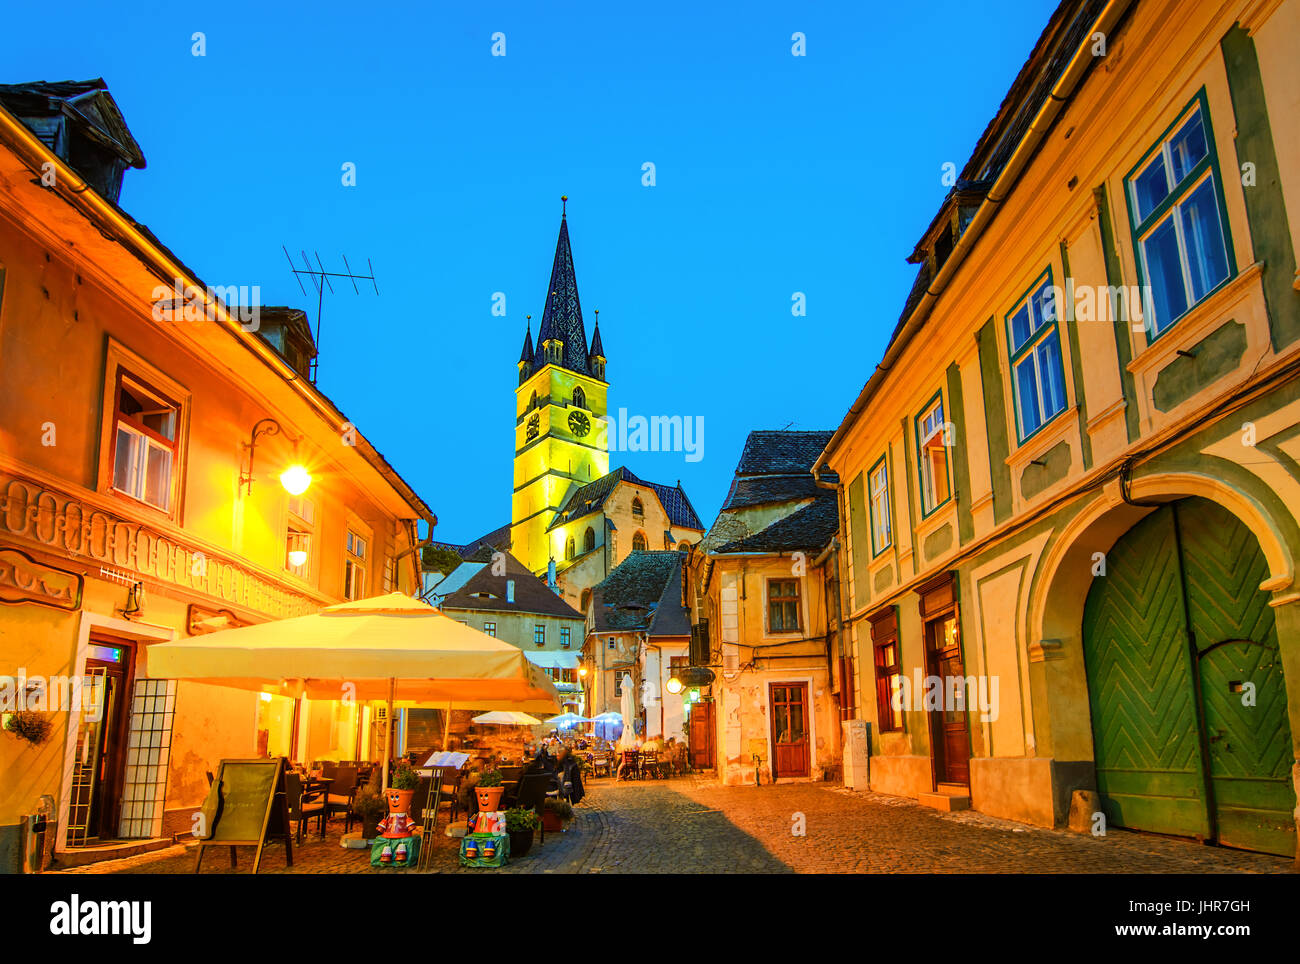 Lutheran Church, built  in the Huet Square,  seen from the streets of medieval Lower Town city, Transylvania,Sibiu, Romania. Stock Photo